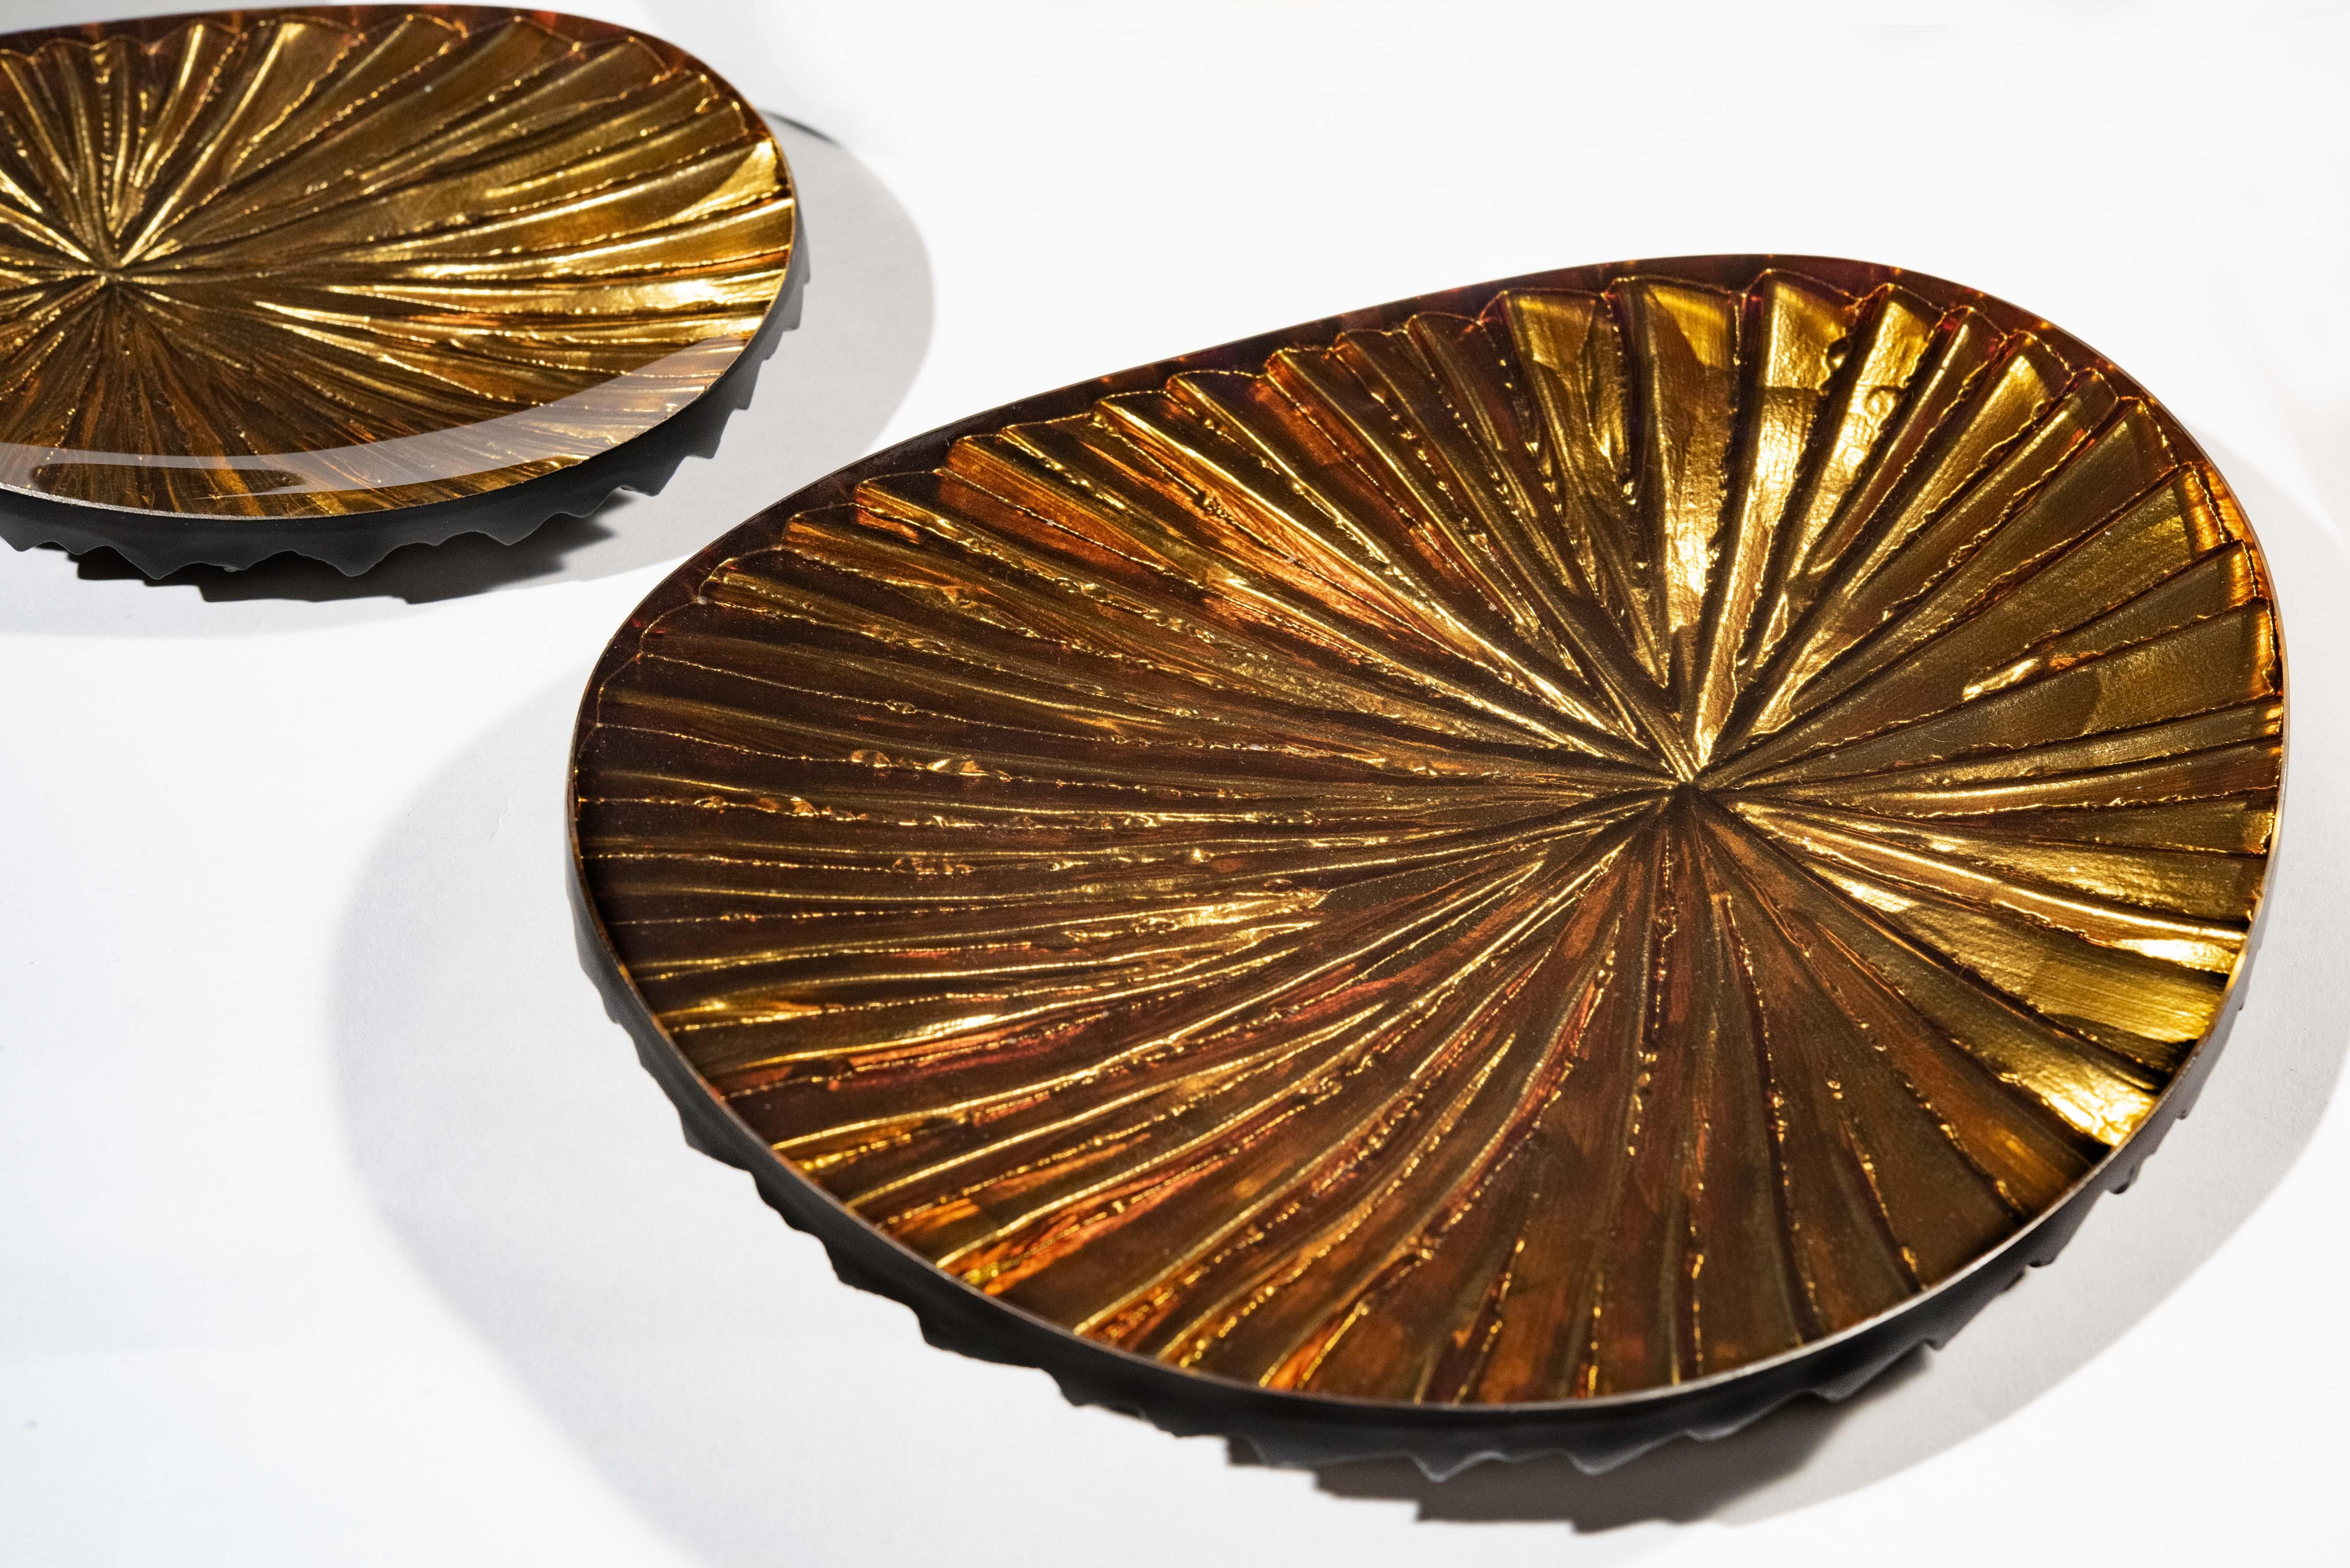 Each bowl have contemporary design ideal for giving an unmistakable style to any environment. The rounded triangle shape gives sobriety and elegance while the warm intense amber color embellished with golden reflections makes them even more refined.